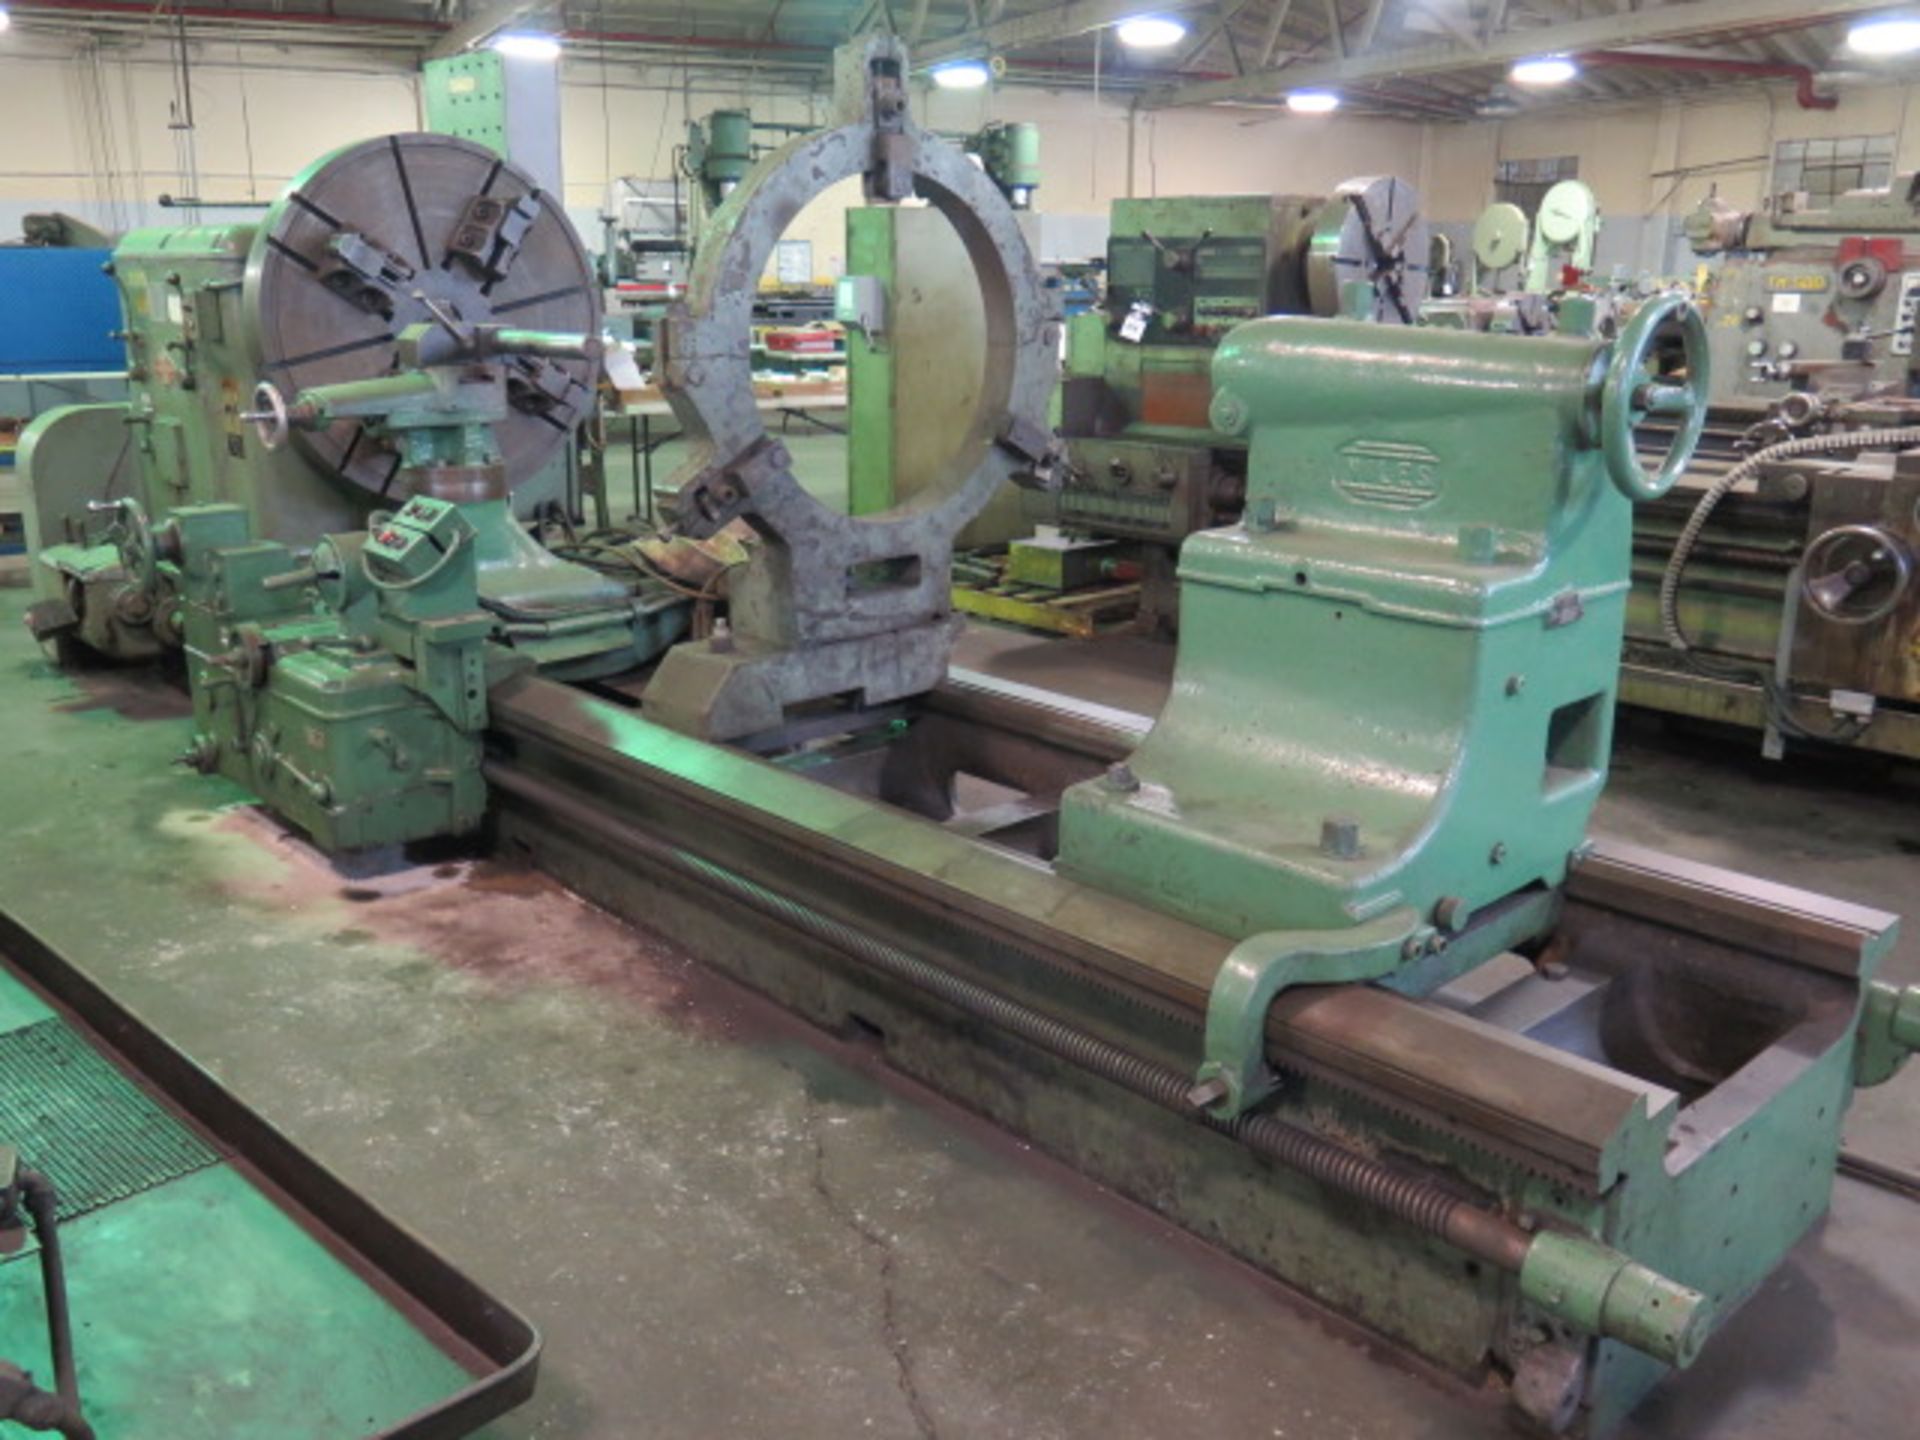 Niles A54P 62” x 140” Lathe s/n 23579 w/ 3.94-232 RPM, Inch Threading, Steady Rest, SOLD AS IS - Image 2 of 20